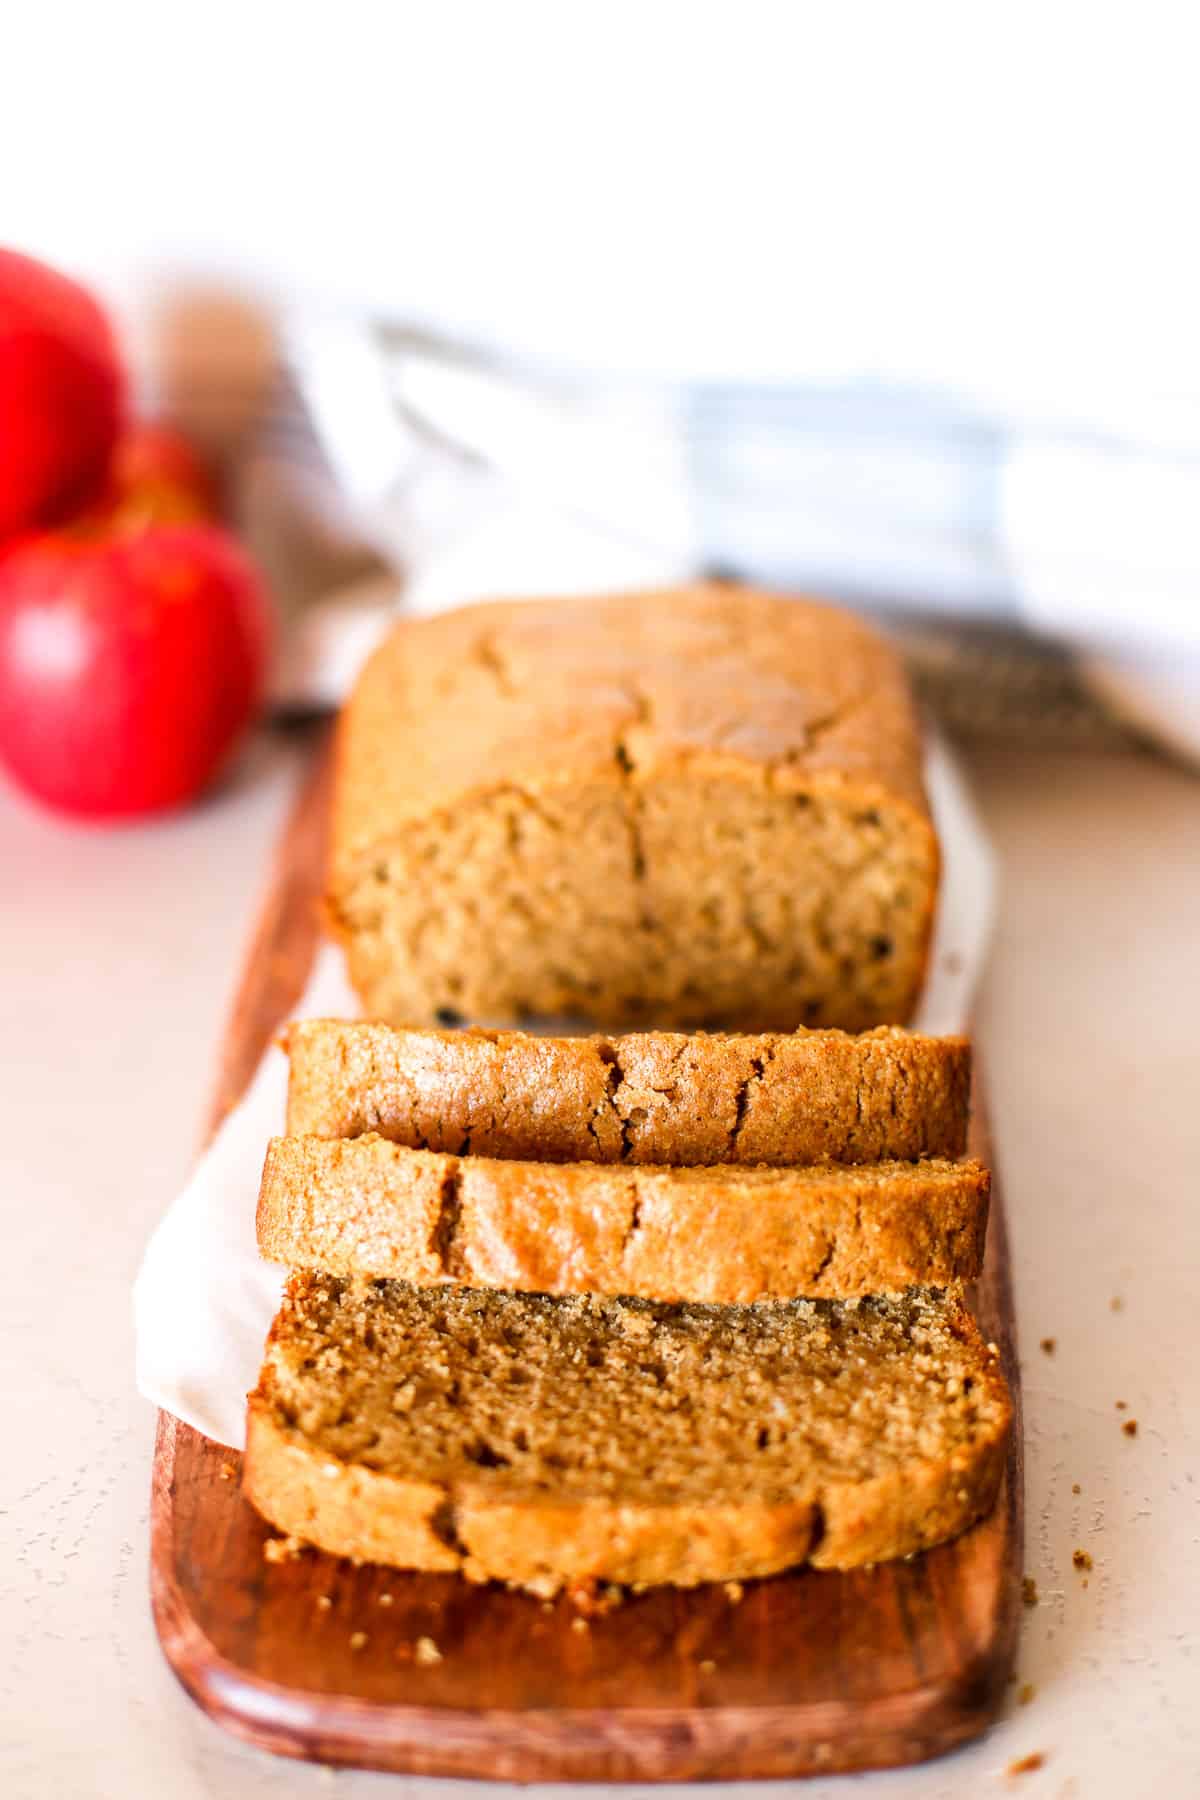 Applesauce Bread  : Power up your baking with this delicious recipe!